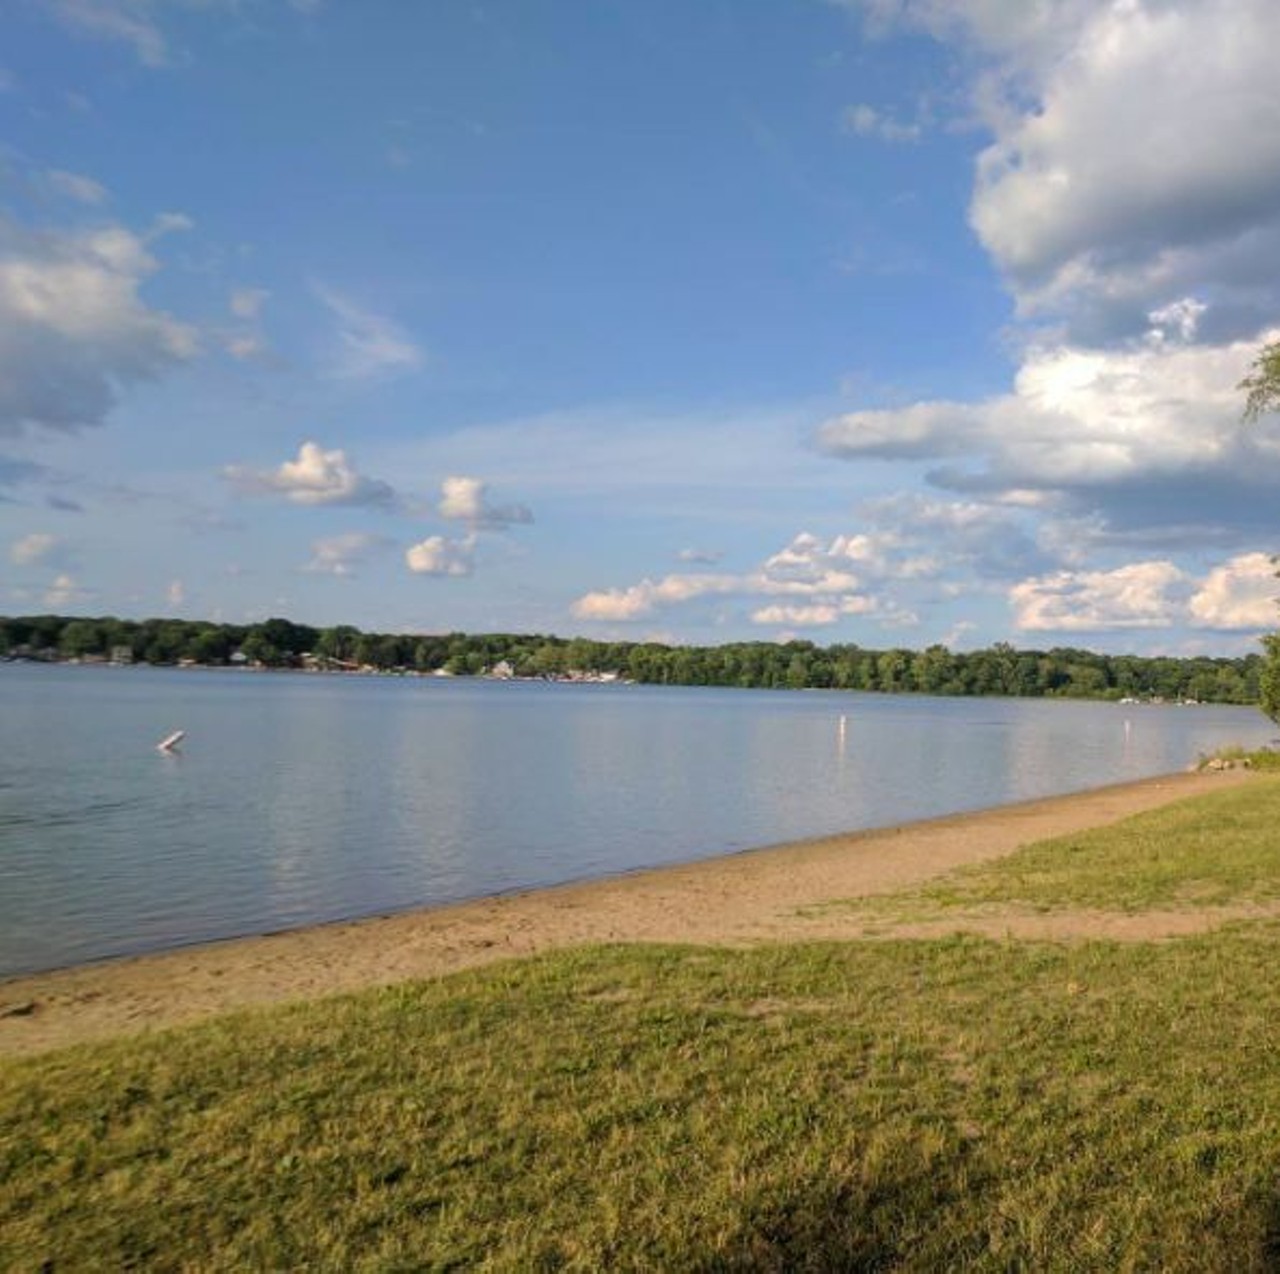 Pinckney State Recreation Area
Pinckney; 1 hour
At 11-thousand acres, this one can get a little overwhelming. But once you&#146;ve chosen your preferred lakeshore, you&#146;ll be sure to enjoy the park&#146;s quiet seclusion. Recreation passport required.
Photo via IG user @jillkiepura